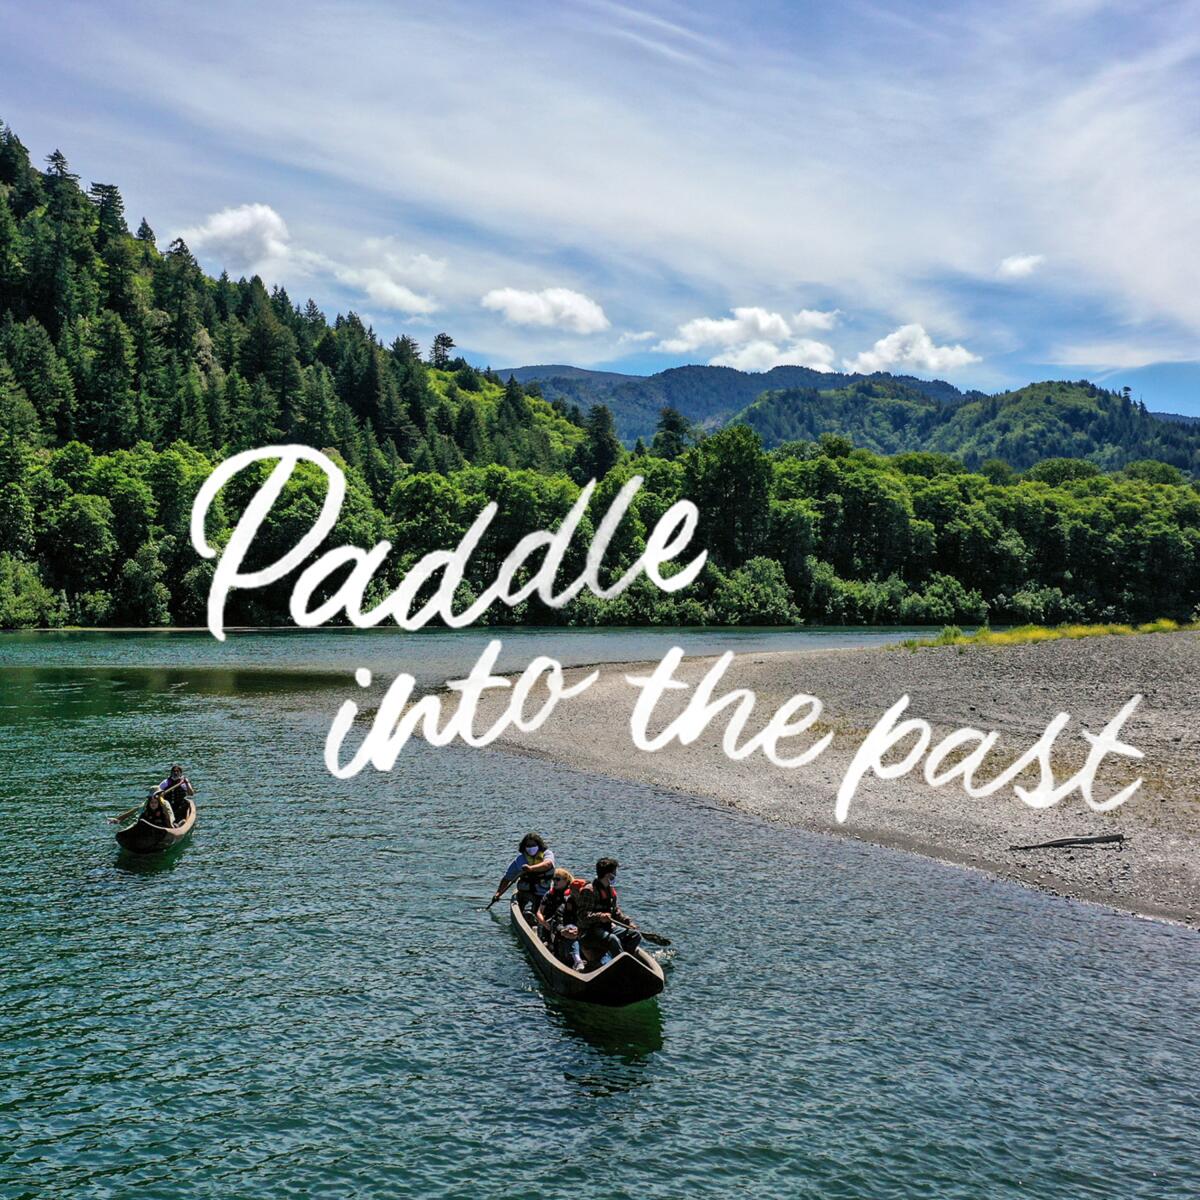 Photograph of two canoes on the Klamath River with text overlay "Paddle Into the Past"